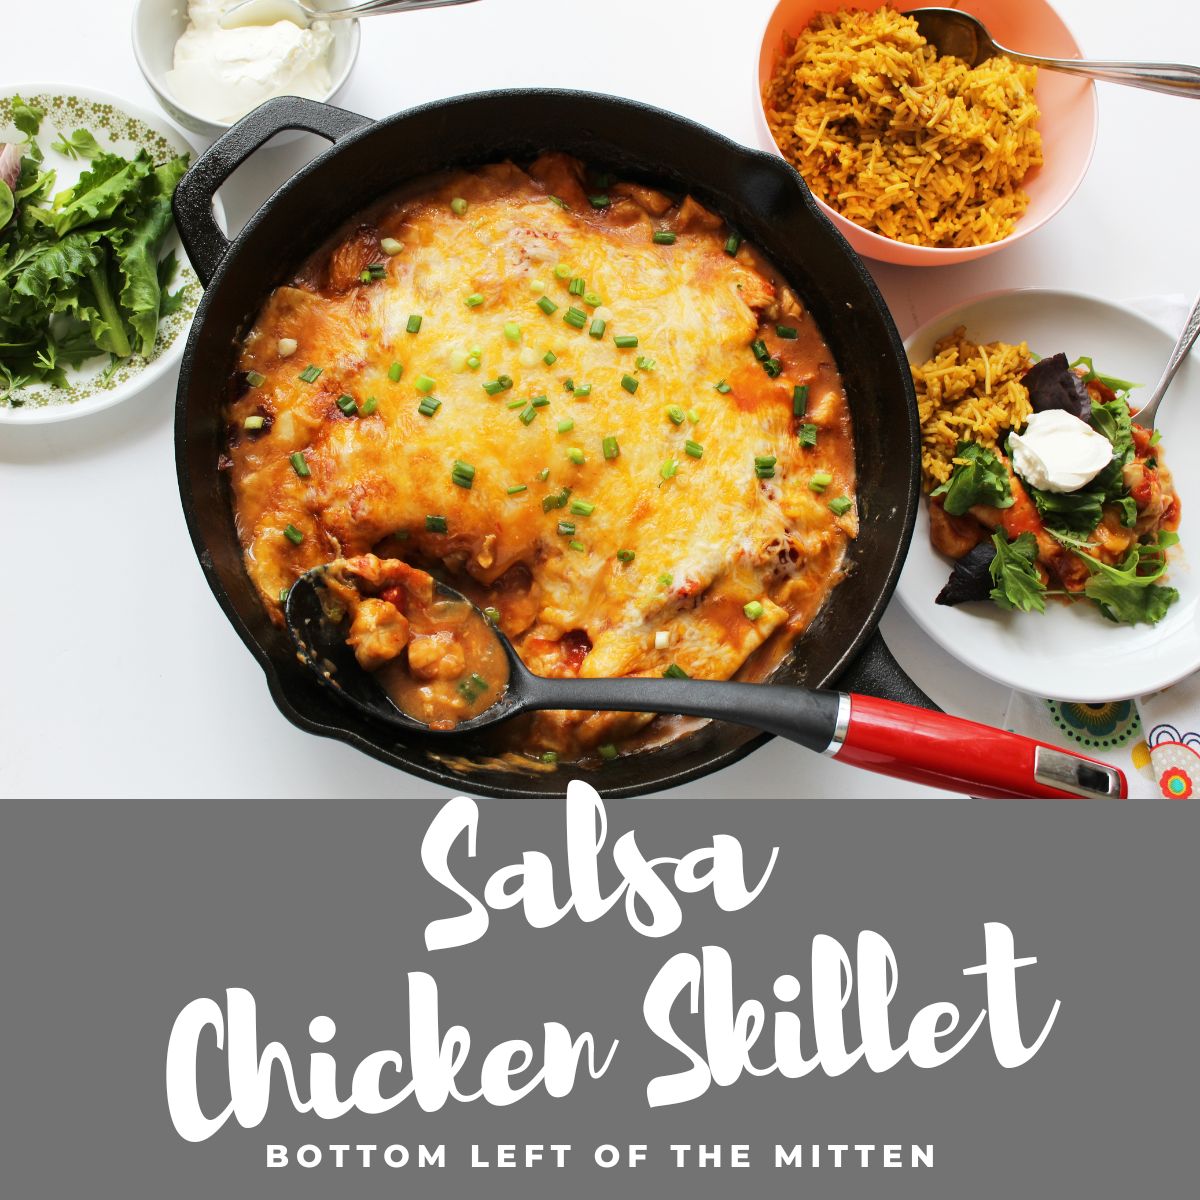 Salsa Chicken Skillet made in a cast iron pan.